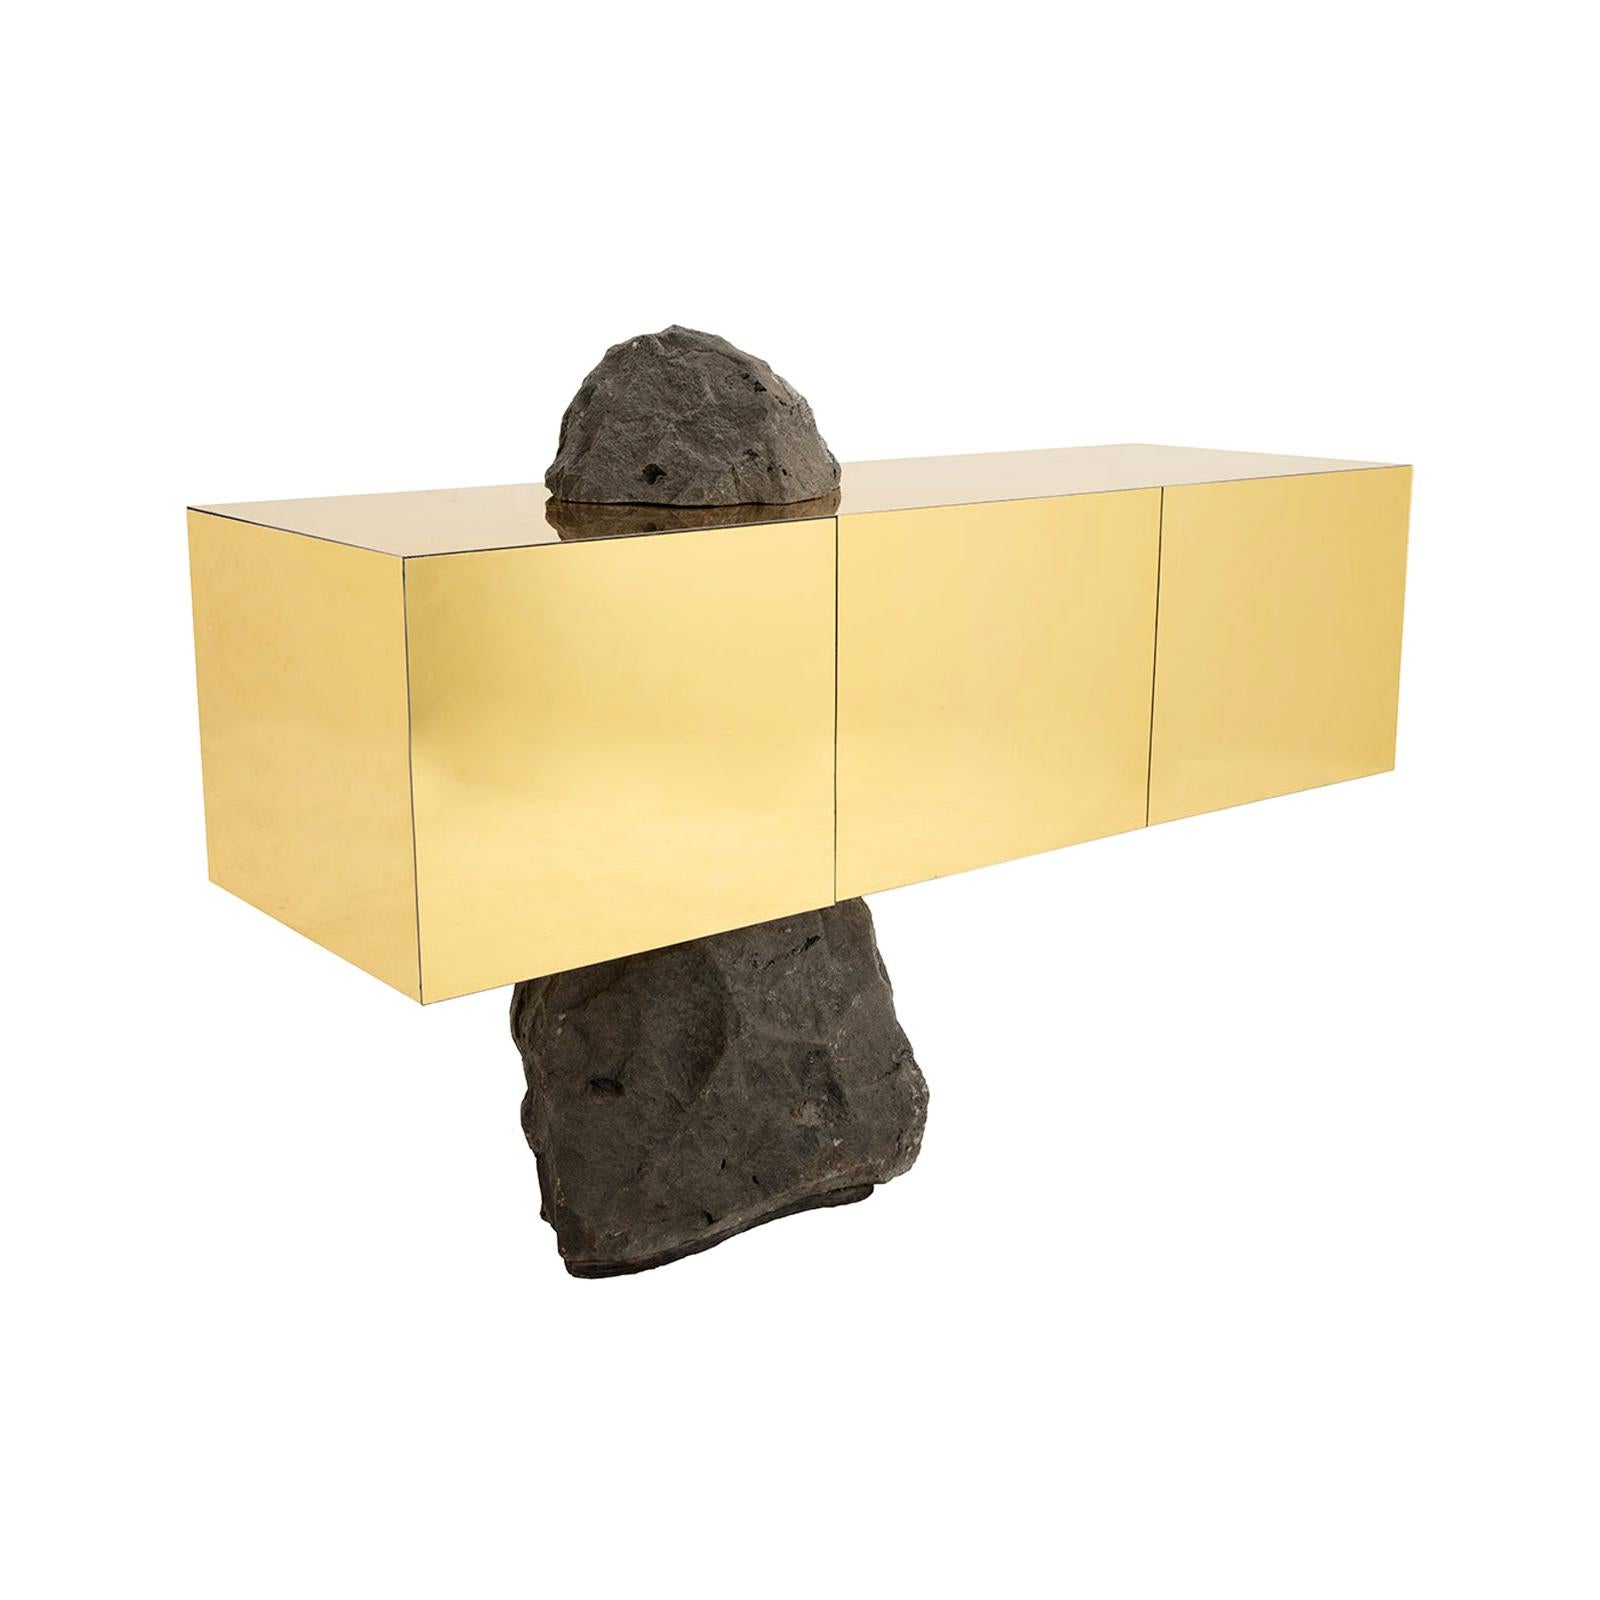 Rossana Orlandi Odyssey H Sideboard in Stone by Francesco Messina for Cypraea For Sale